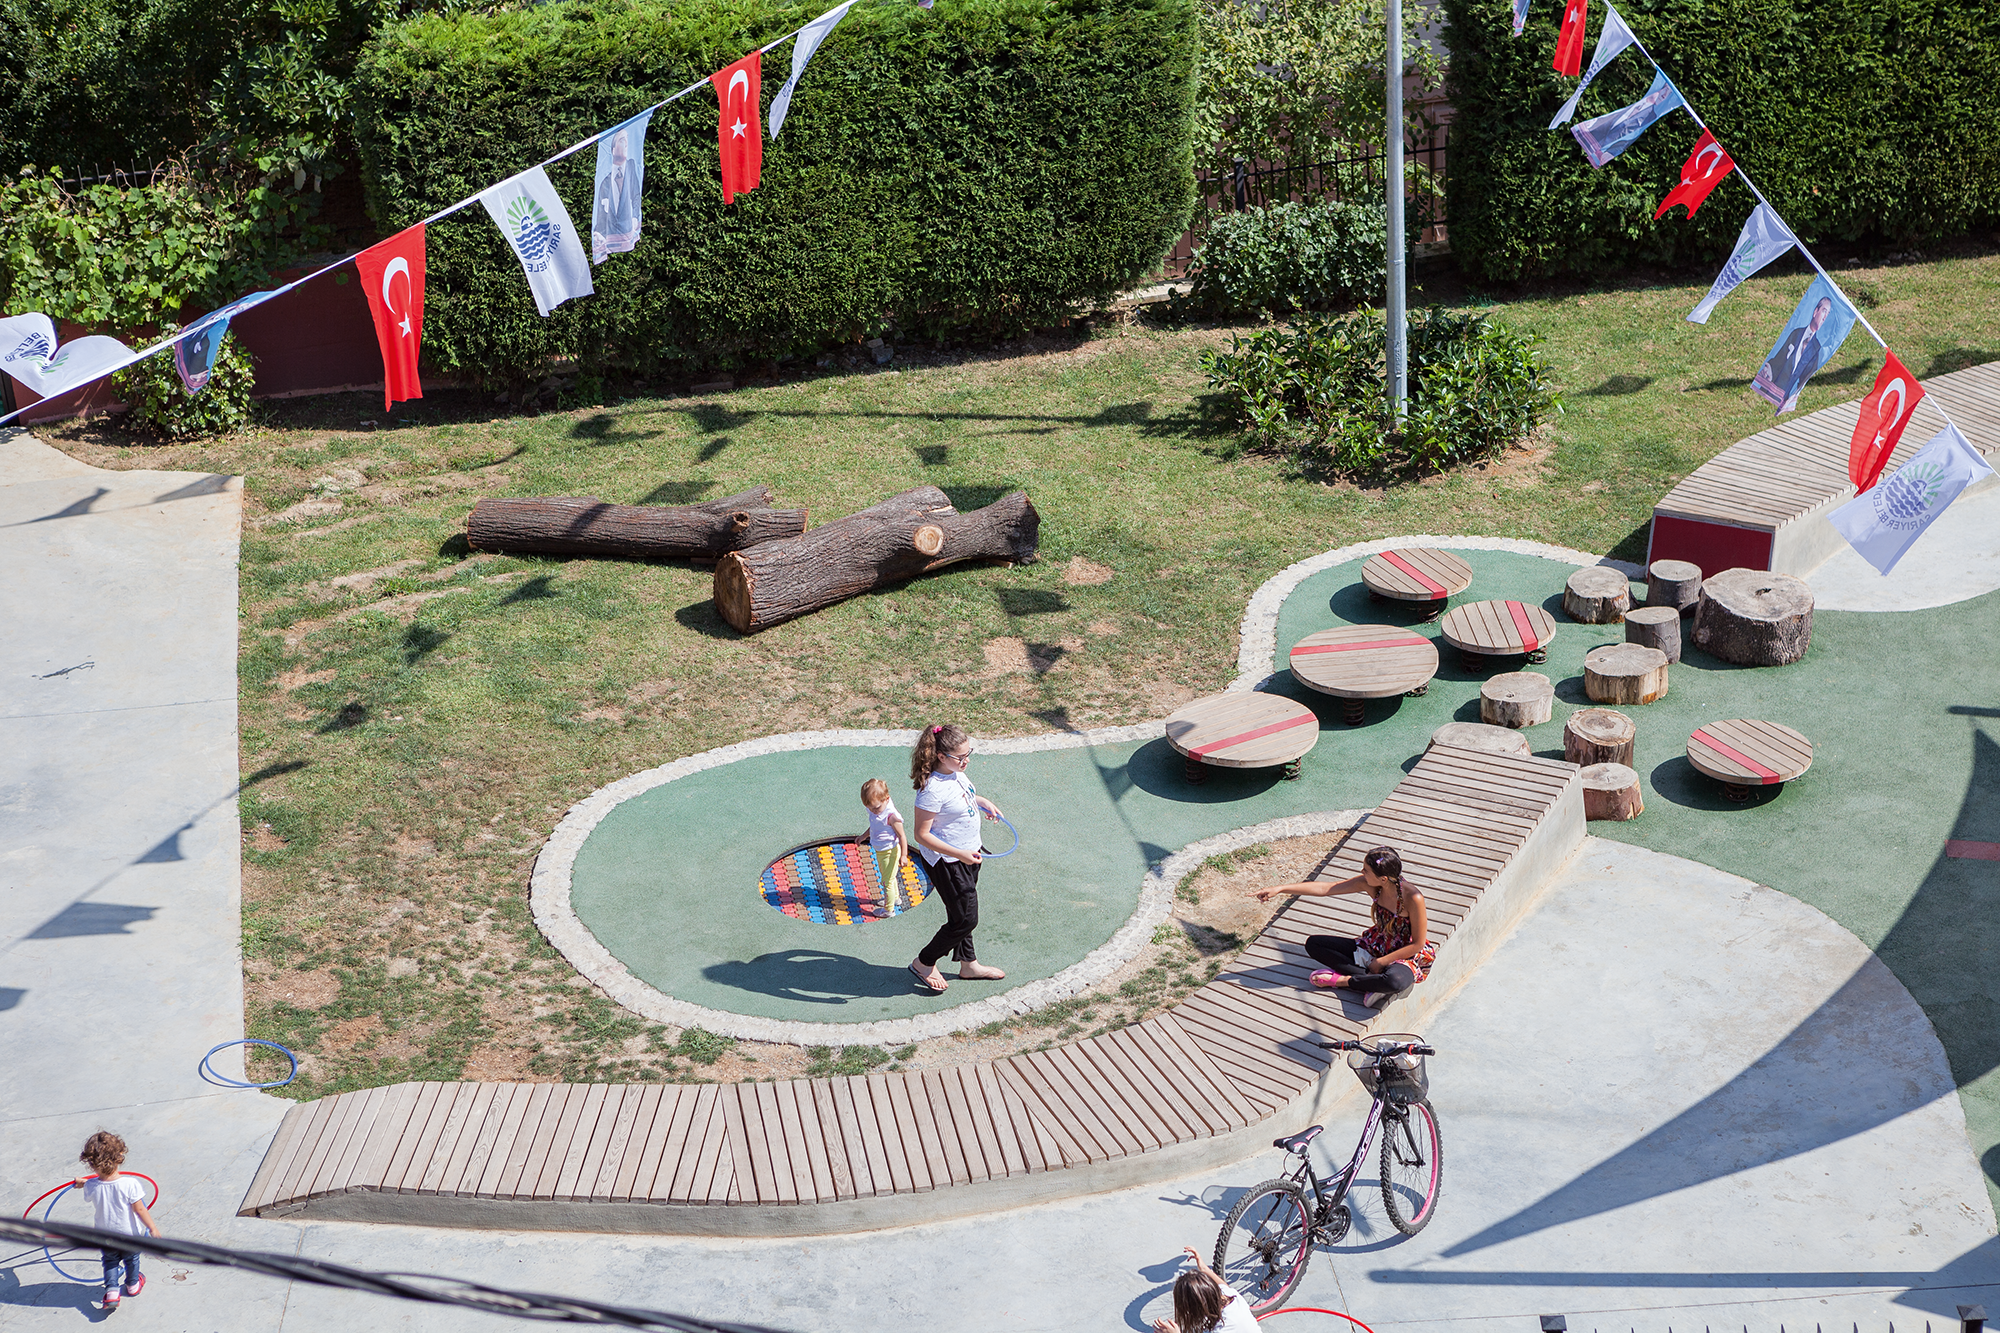 A playground in Istanbul designed for children from birth to age 3 and their caregivers